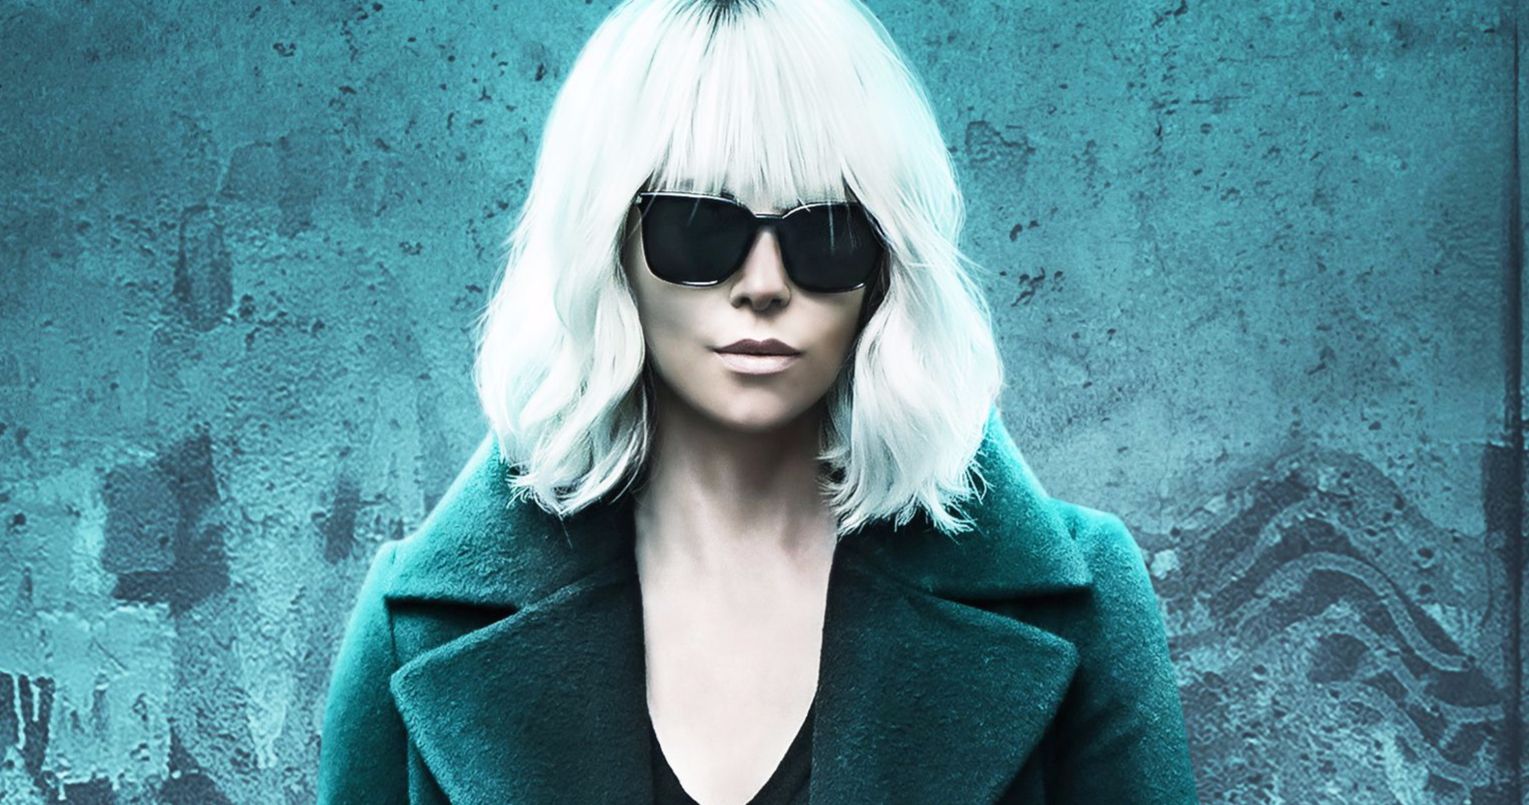 Atomic Blonde 2 Is in Early Development at Netflix with Charlize Theron